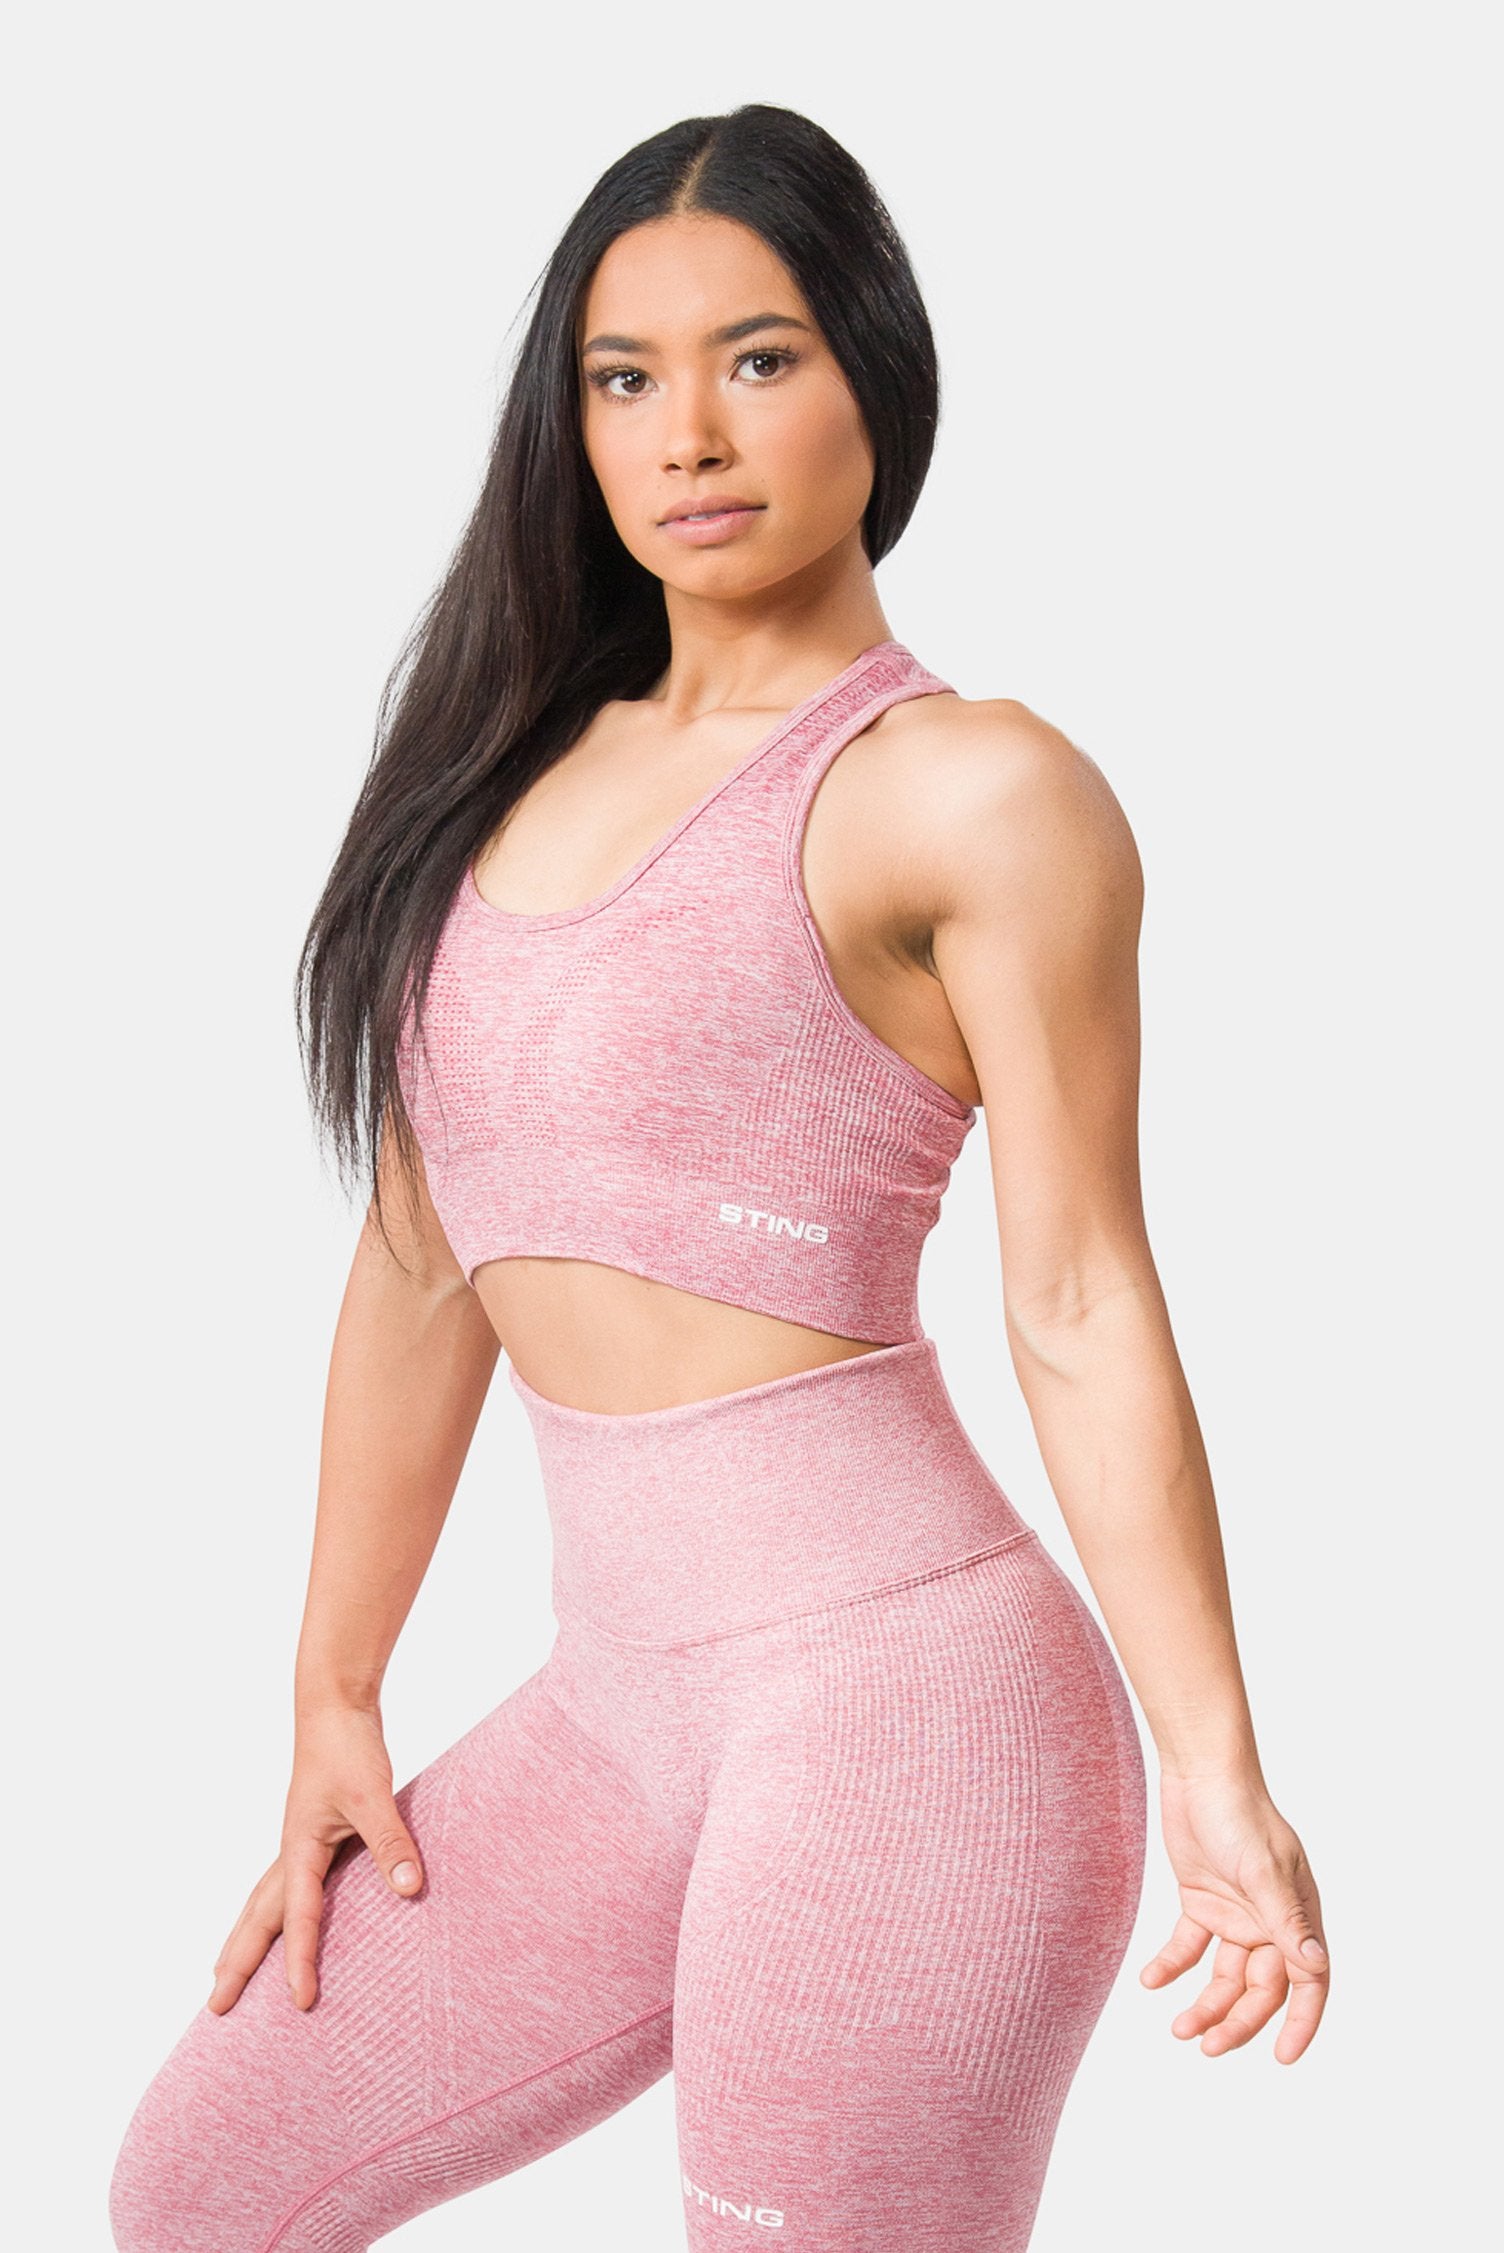 Women's Activewear & Workout Clothes for Women  Sports Wear For Women –  Sting Sports Canada ᵀᴹ